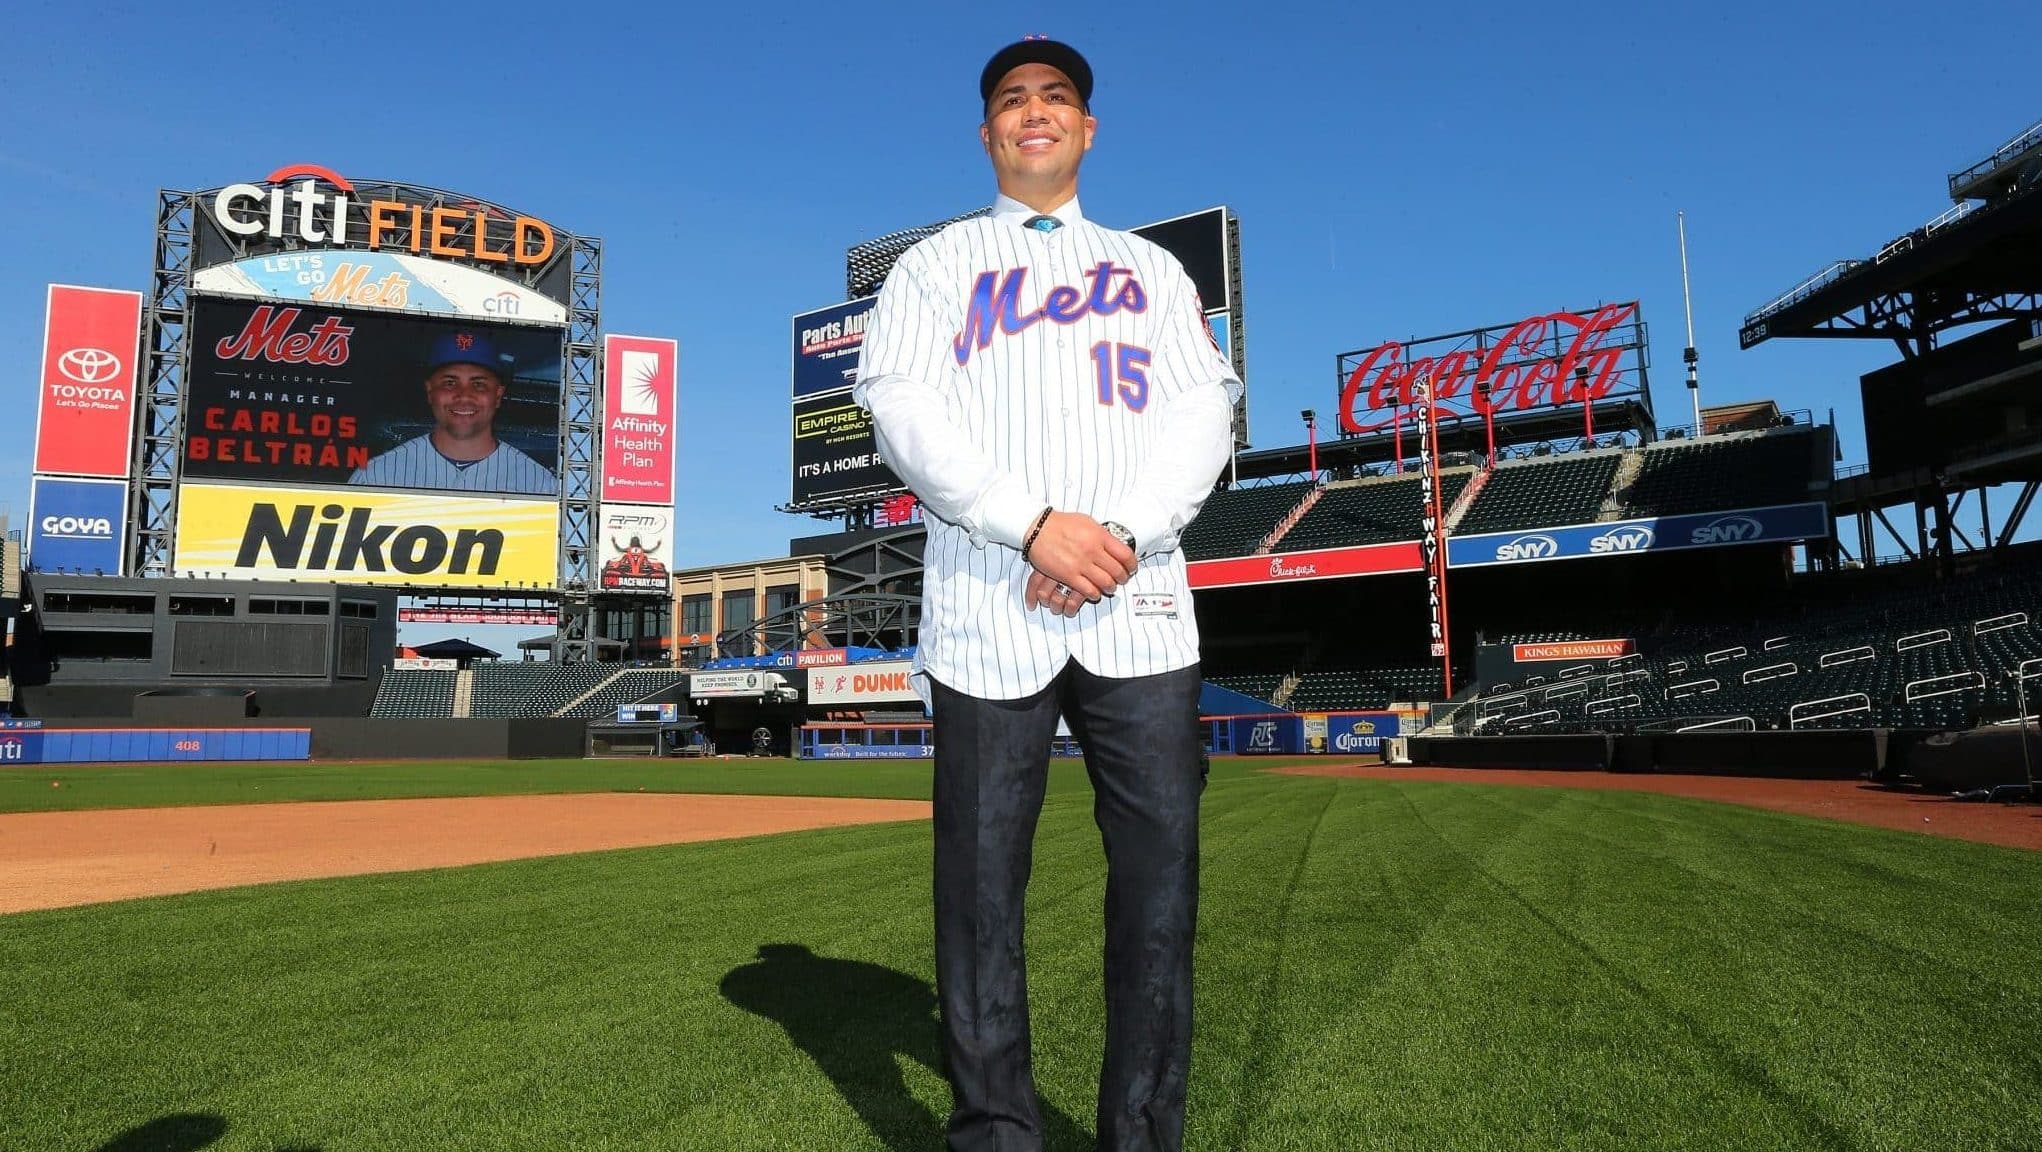 NEW YORK, NY - NOVEMBER 04: Carlos Beltran poses for pictures after being introduced as the next manager of the New York Mets during a press conference at Citi Field on November 4, 2019 in New York City.